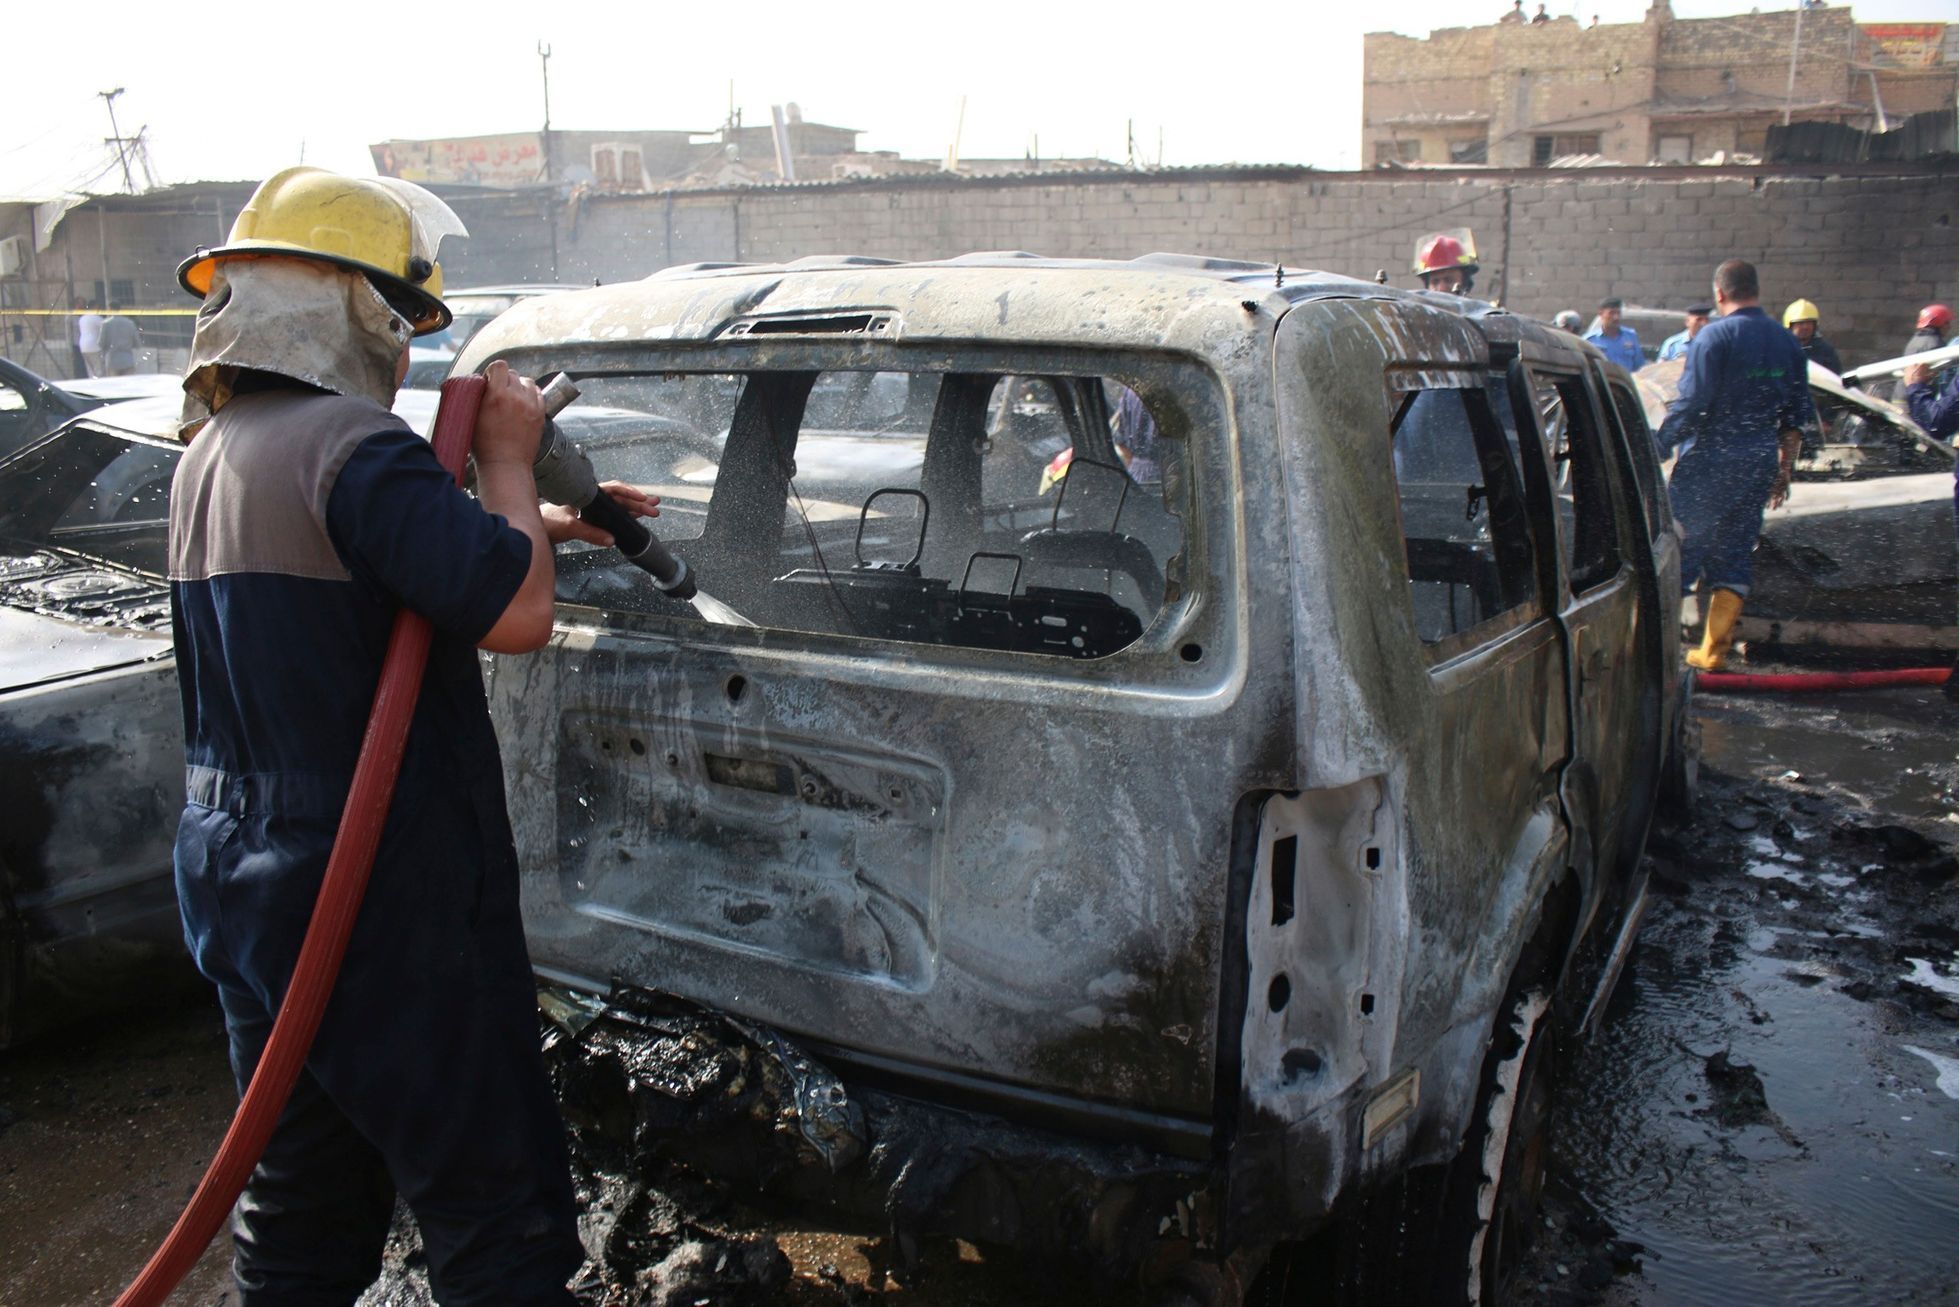 A firefighter hoses down a vehicle after a car bomb attack in Basra, southeast of Baghdad